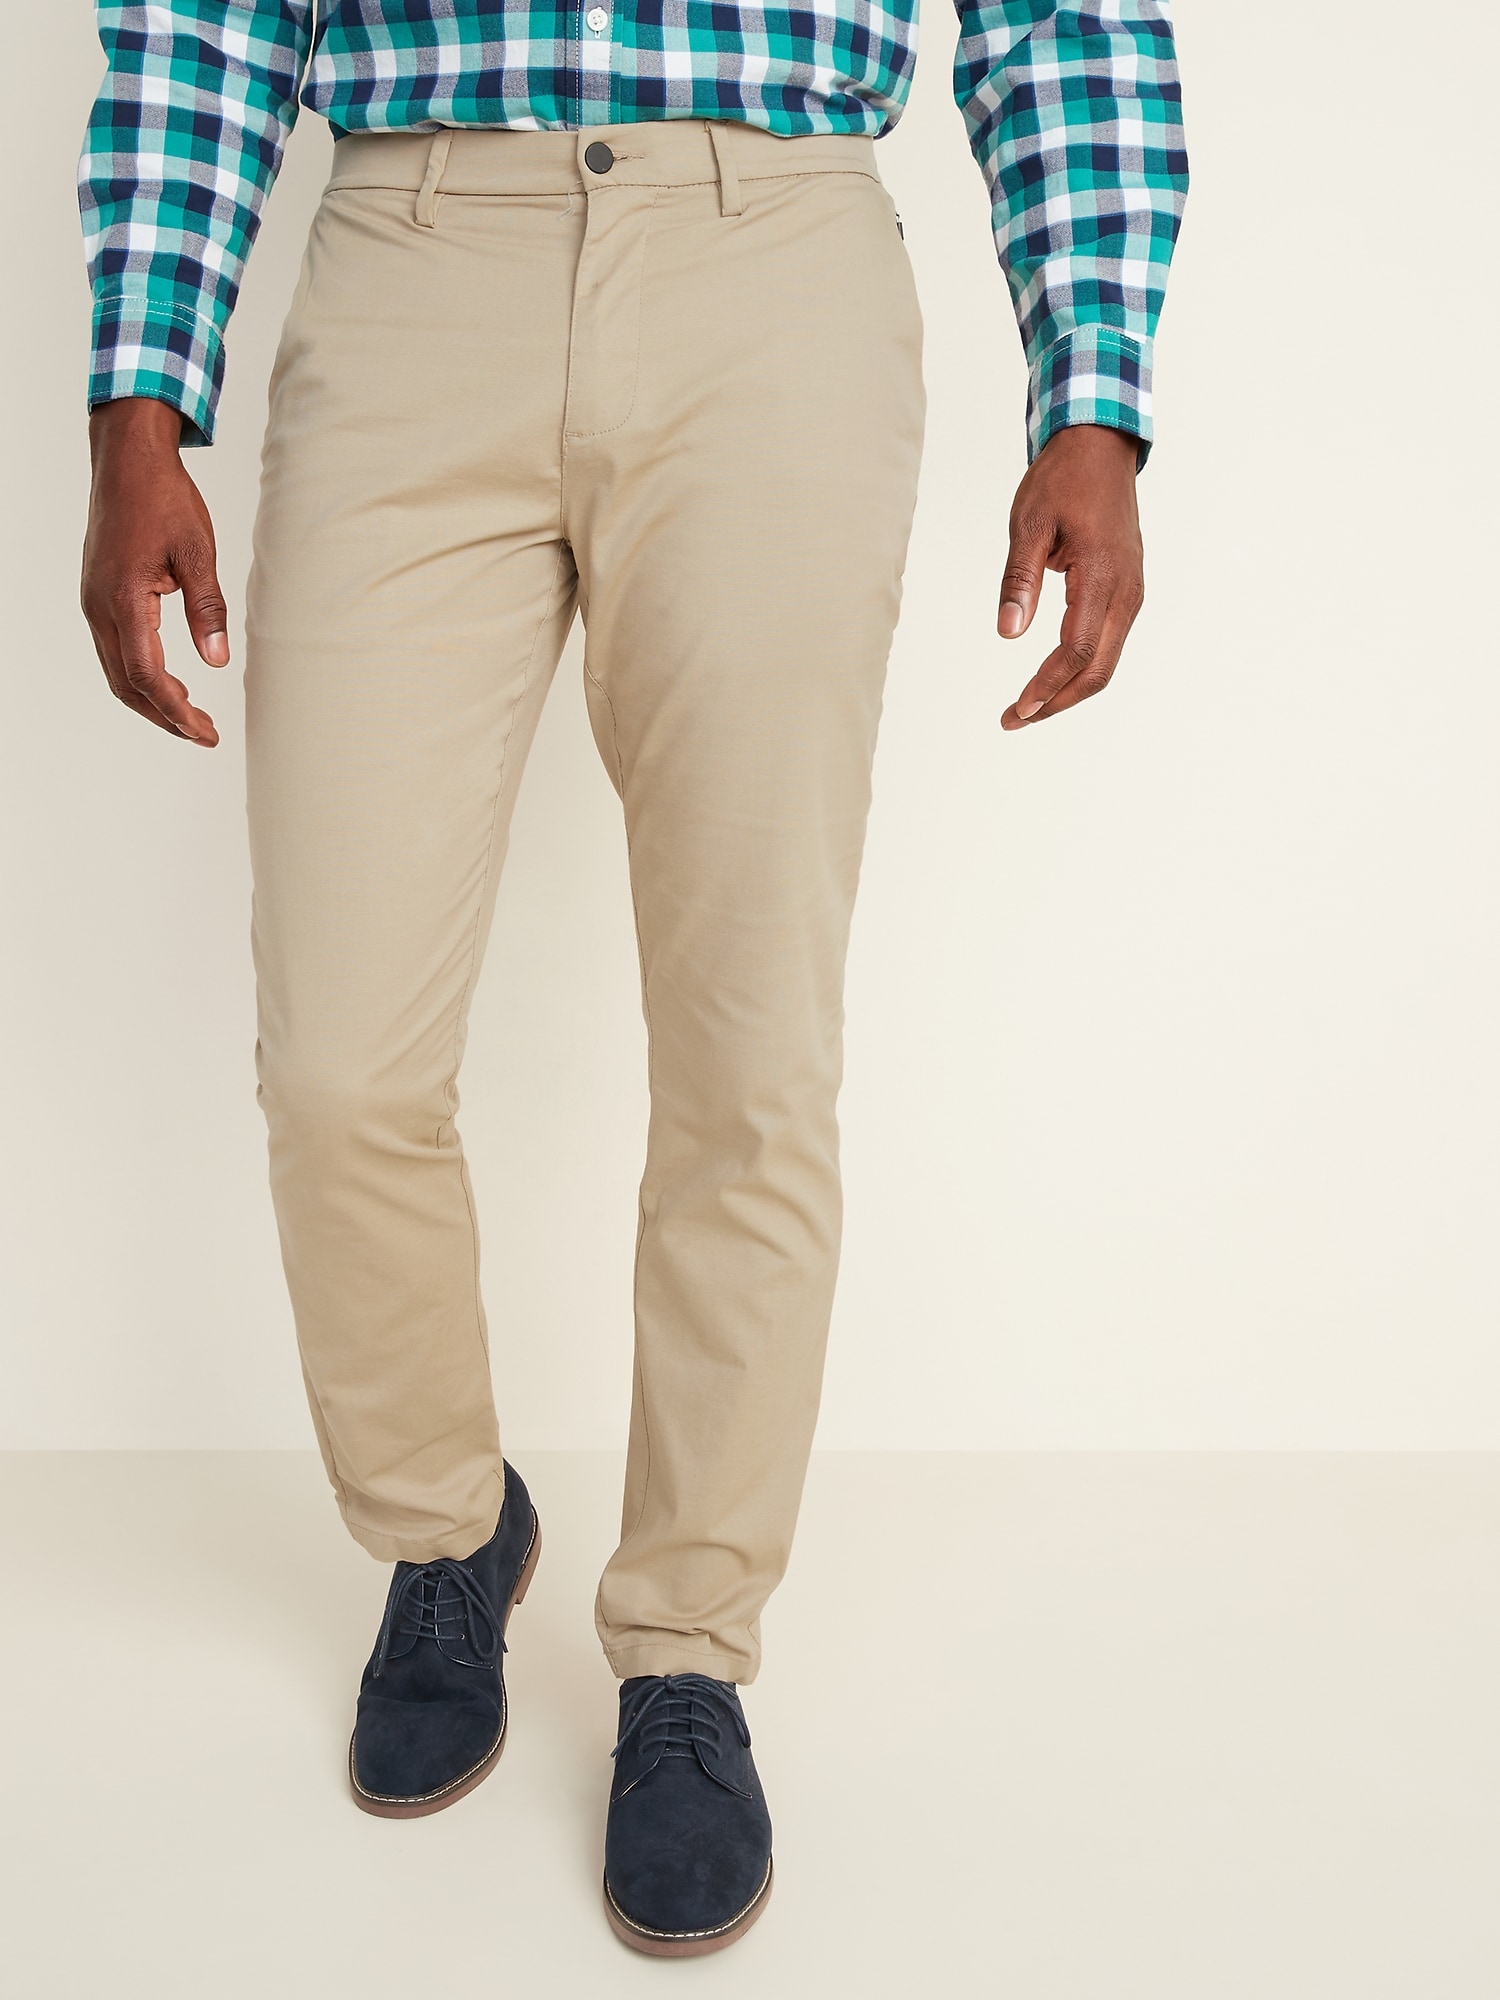 Straight Ultimate Tech BuiltIn Flex Chino Pants for Men  Old Navy